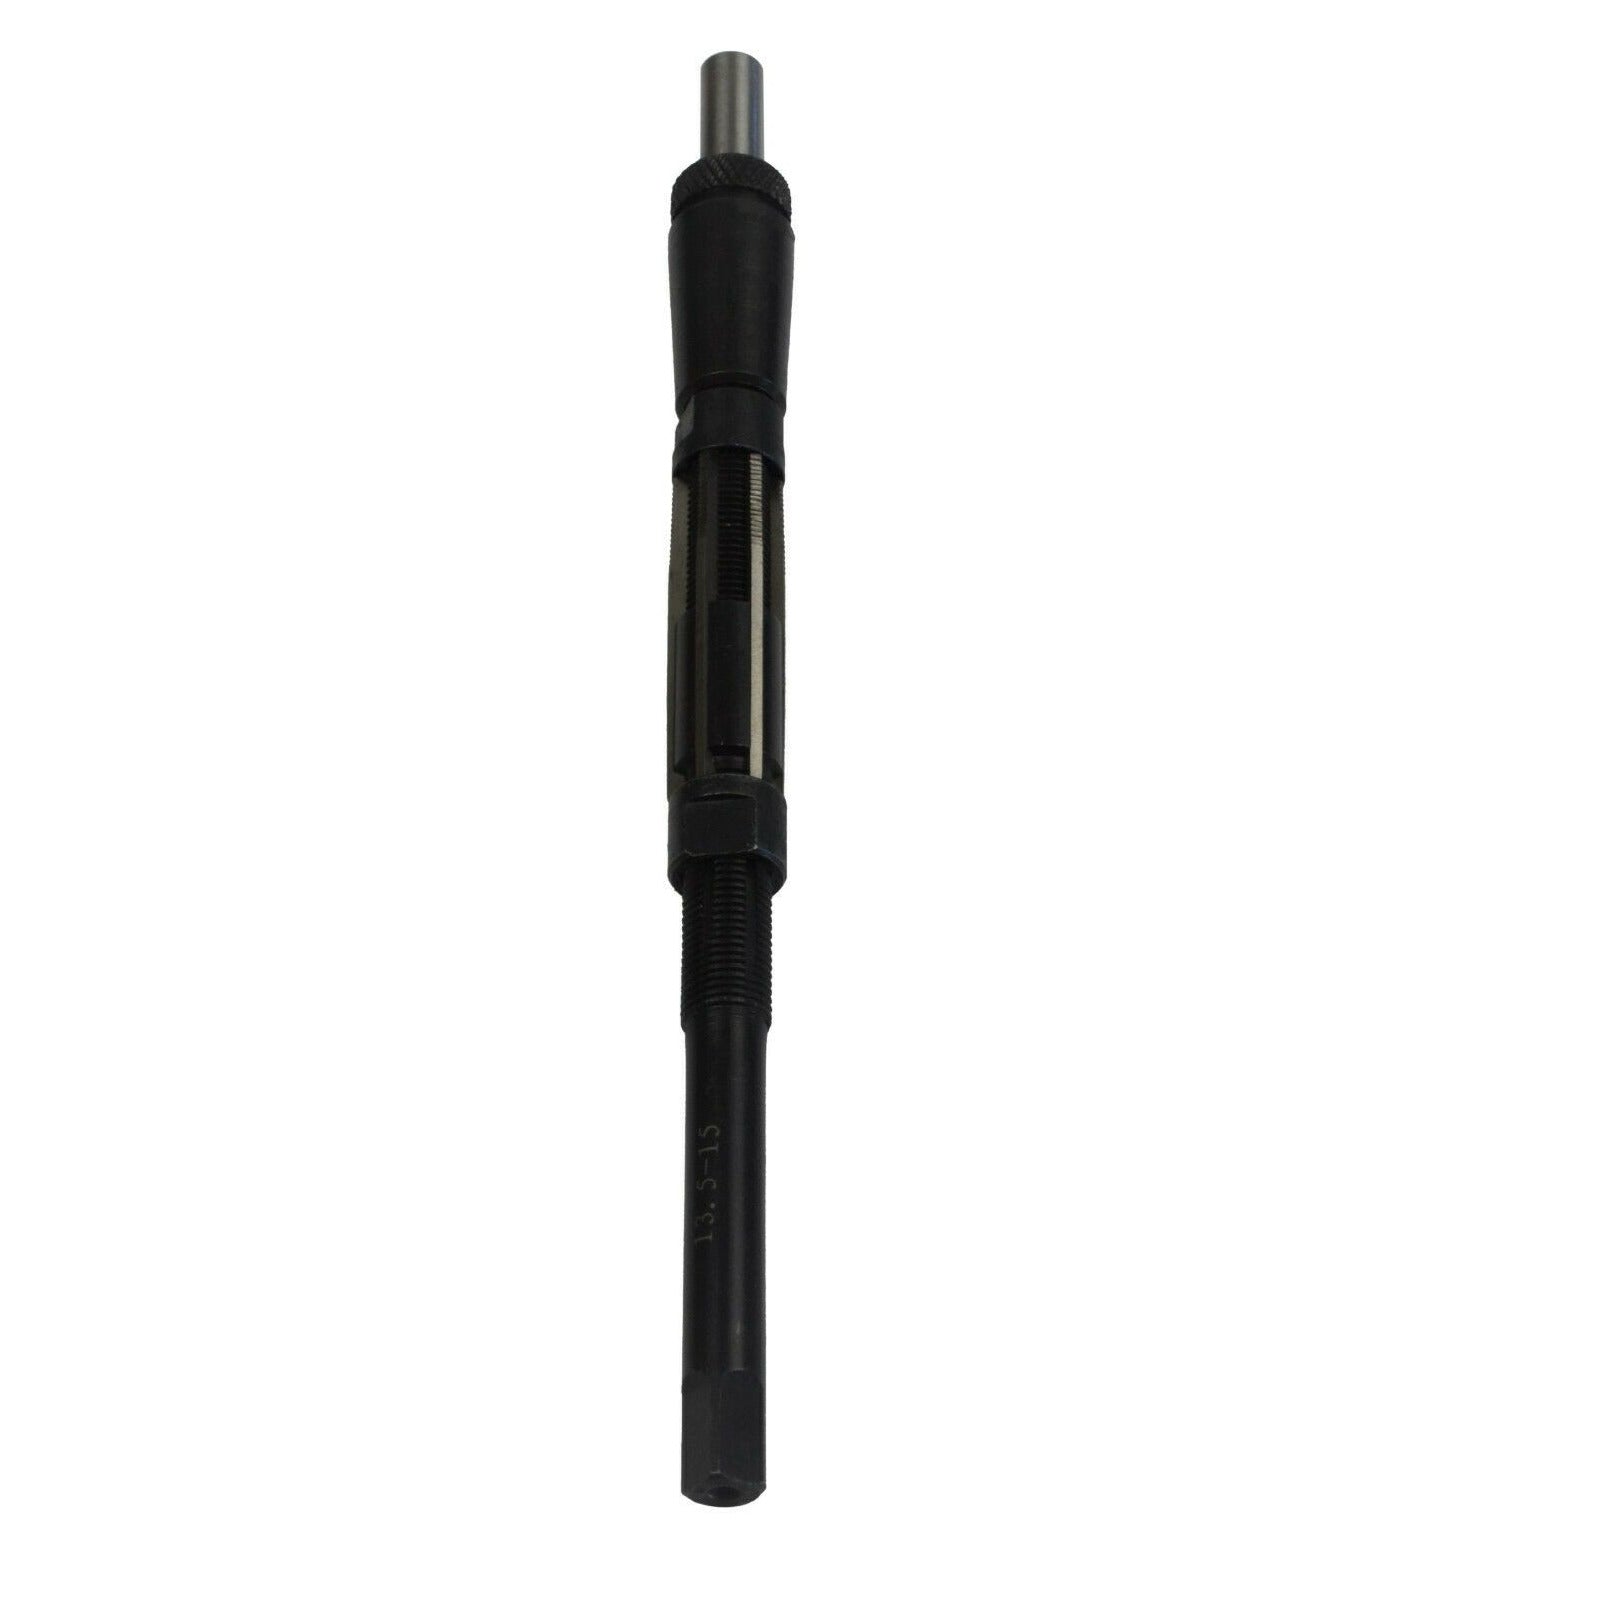 13.5 - 15mm Adjustable Hand Reamer with Guide